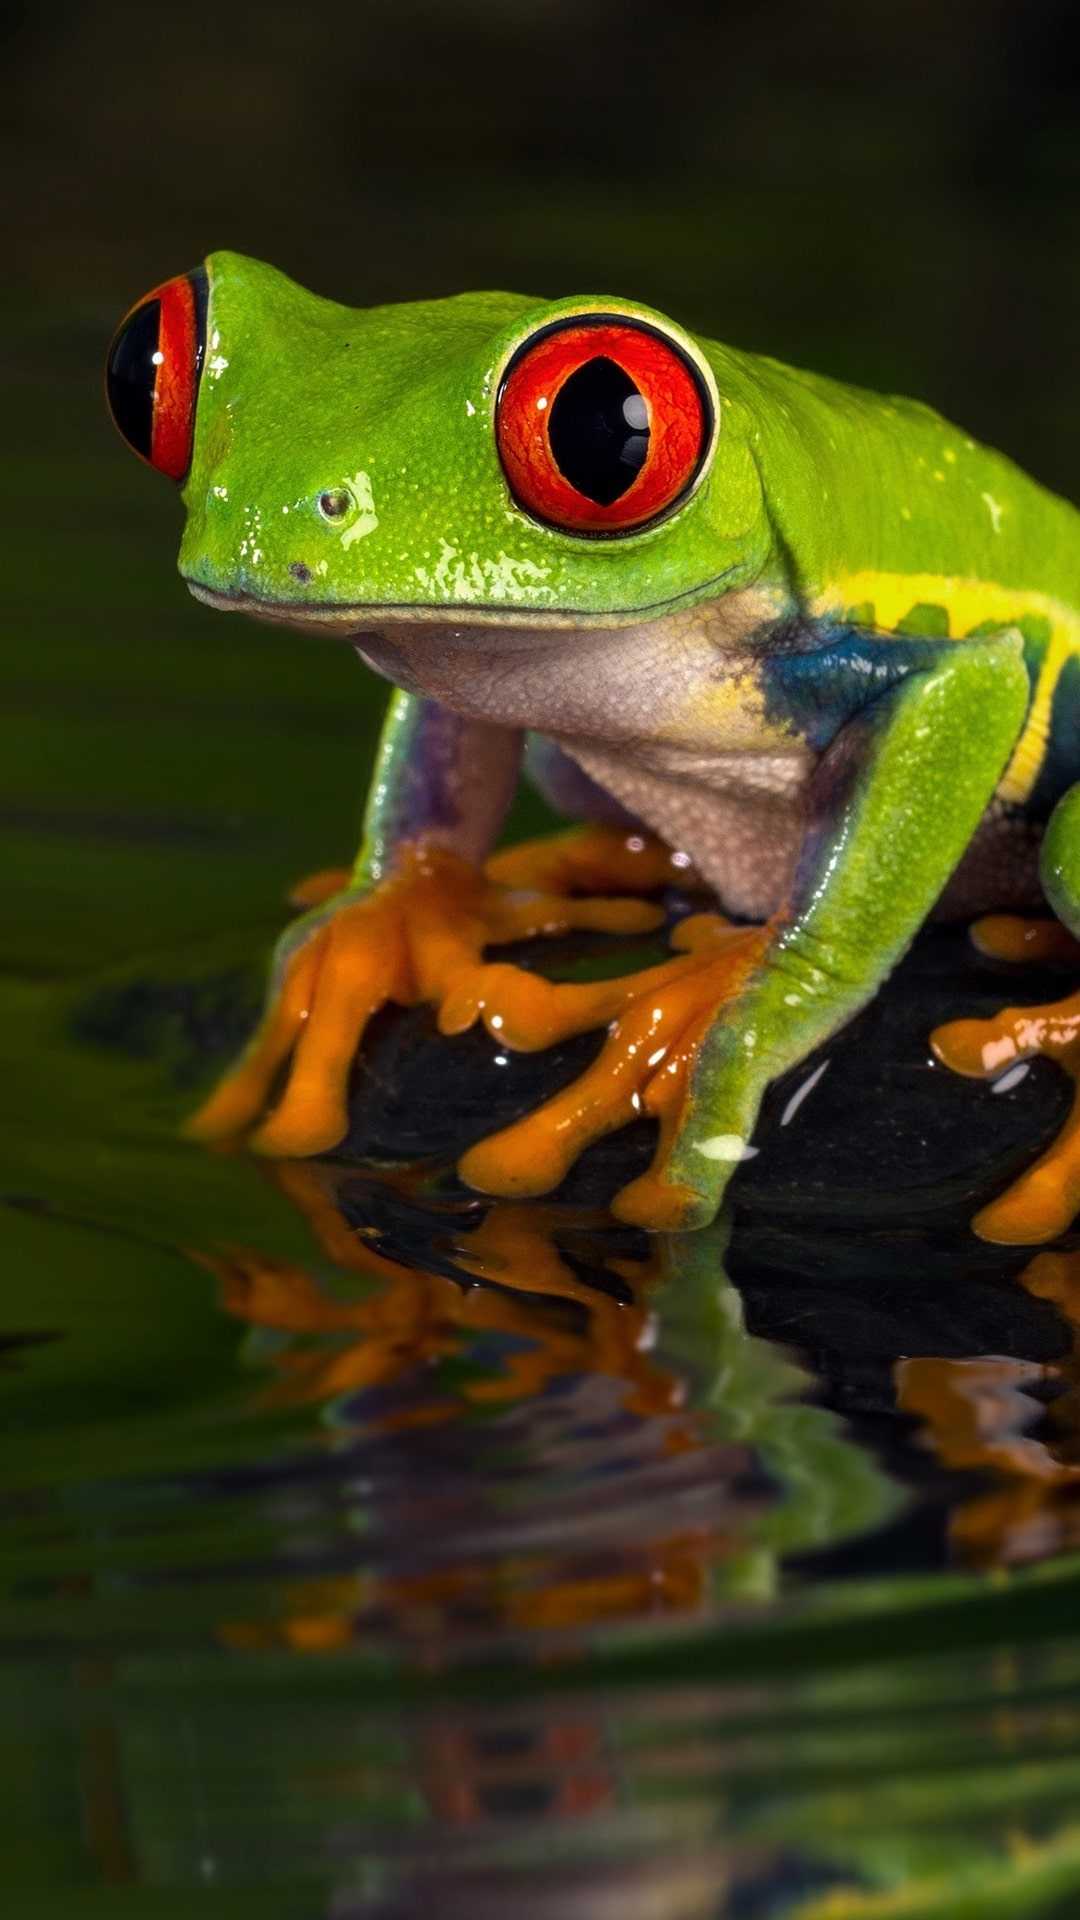 Frog Aesthetic Wallpaper Pc - Frog Full Hd Hdtv Fhd 1080p Wallpapers Hd